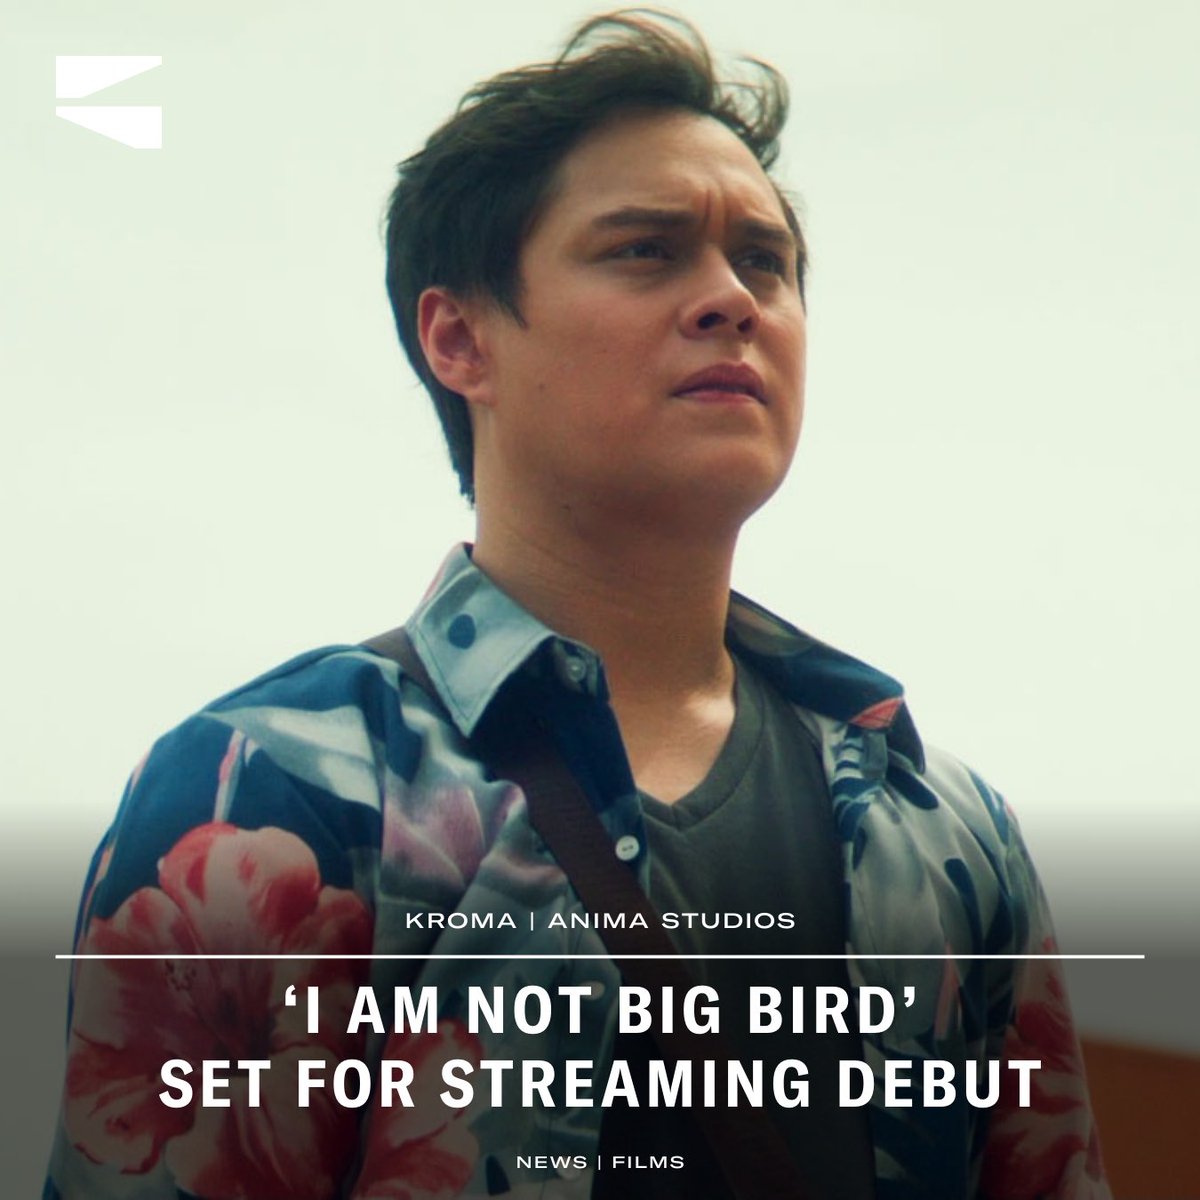 Big Bird is ready for round two 😉 Pause, rewind, and repeat all you can while watching “I Am Not Big Bird,” starring Enrique Gil, as it’s finally making its explosive streaming debut on Netflix this May 21st! Directed by Victor Villanueva, this comedy-adventure is a